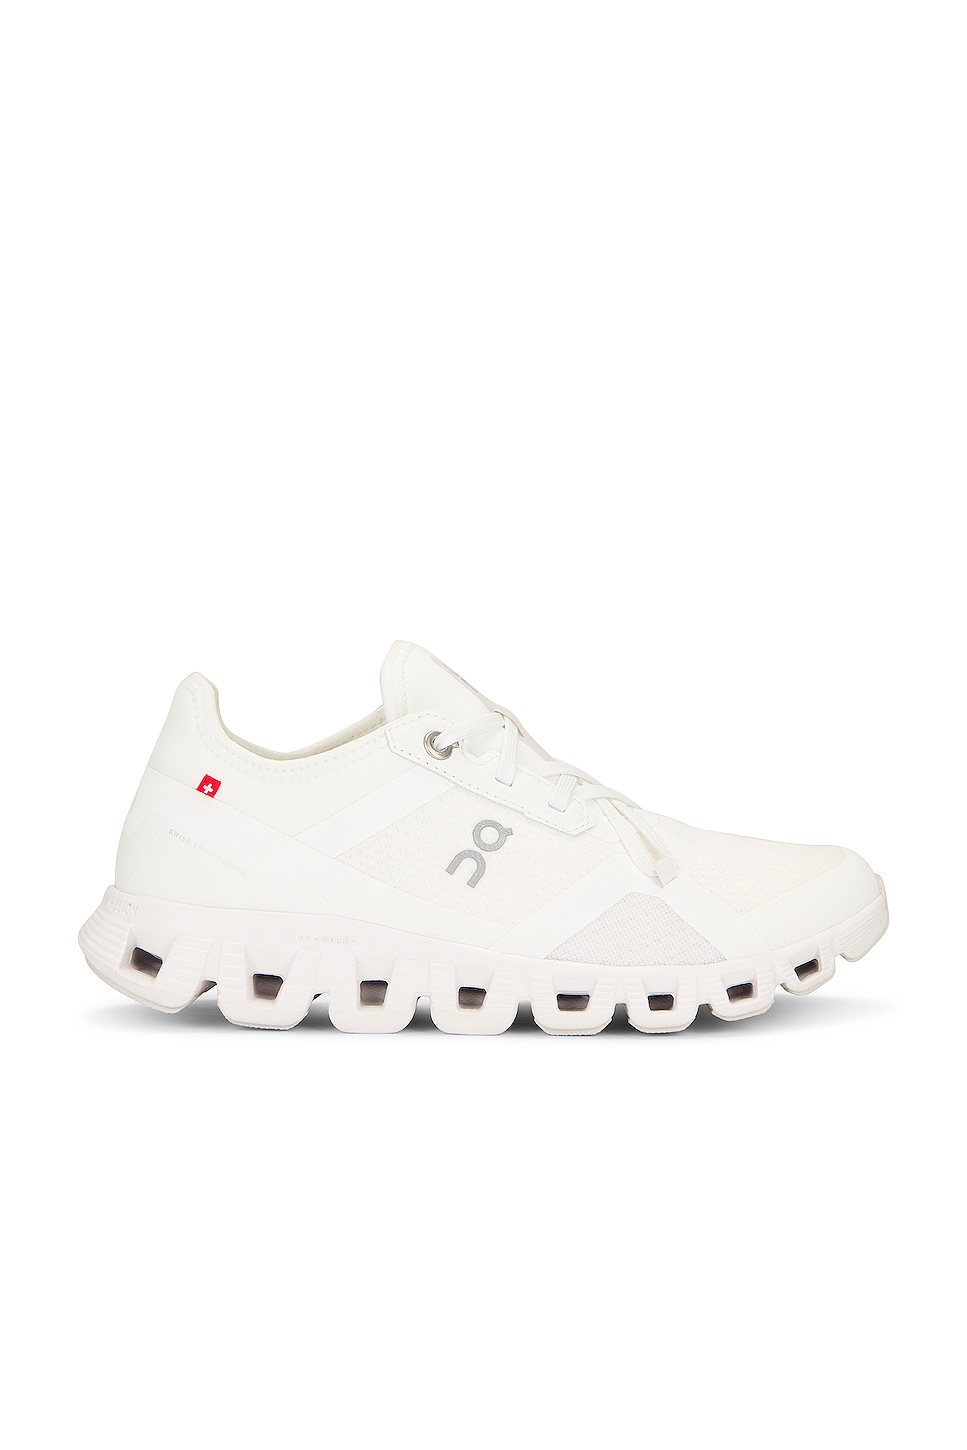 Image 1 of Cloud X 3 Ad Sneaker in Undyed White & White